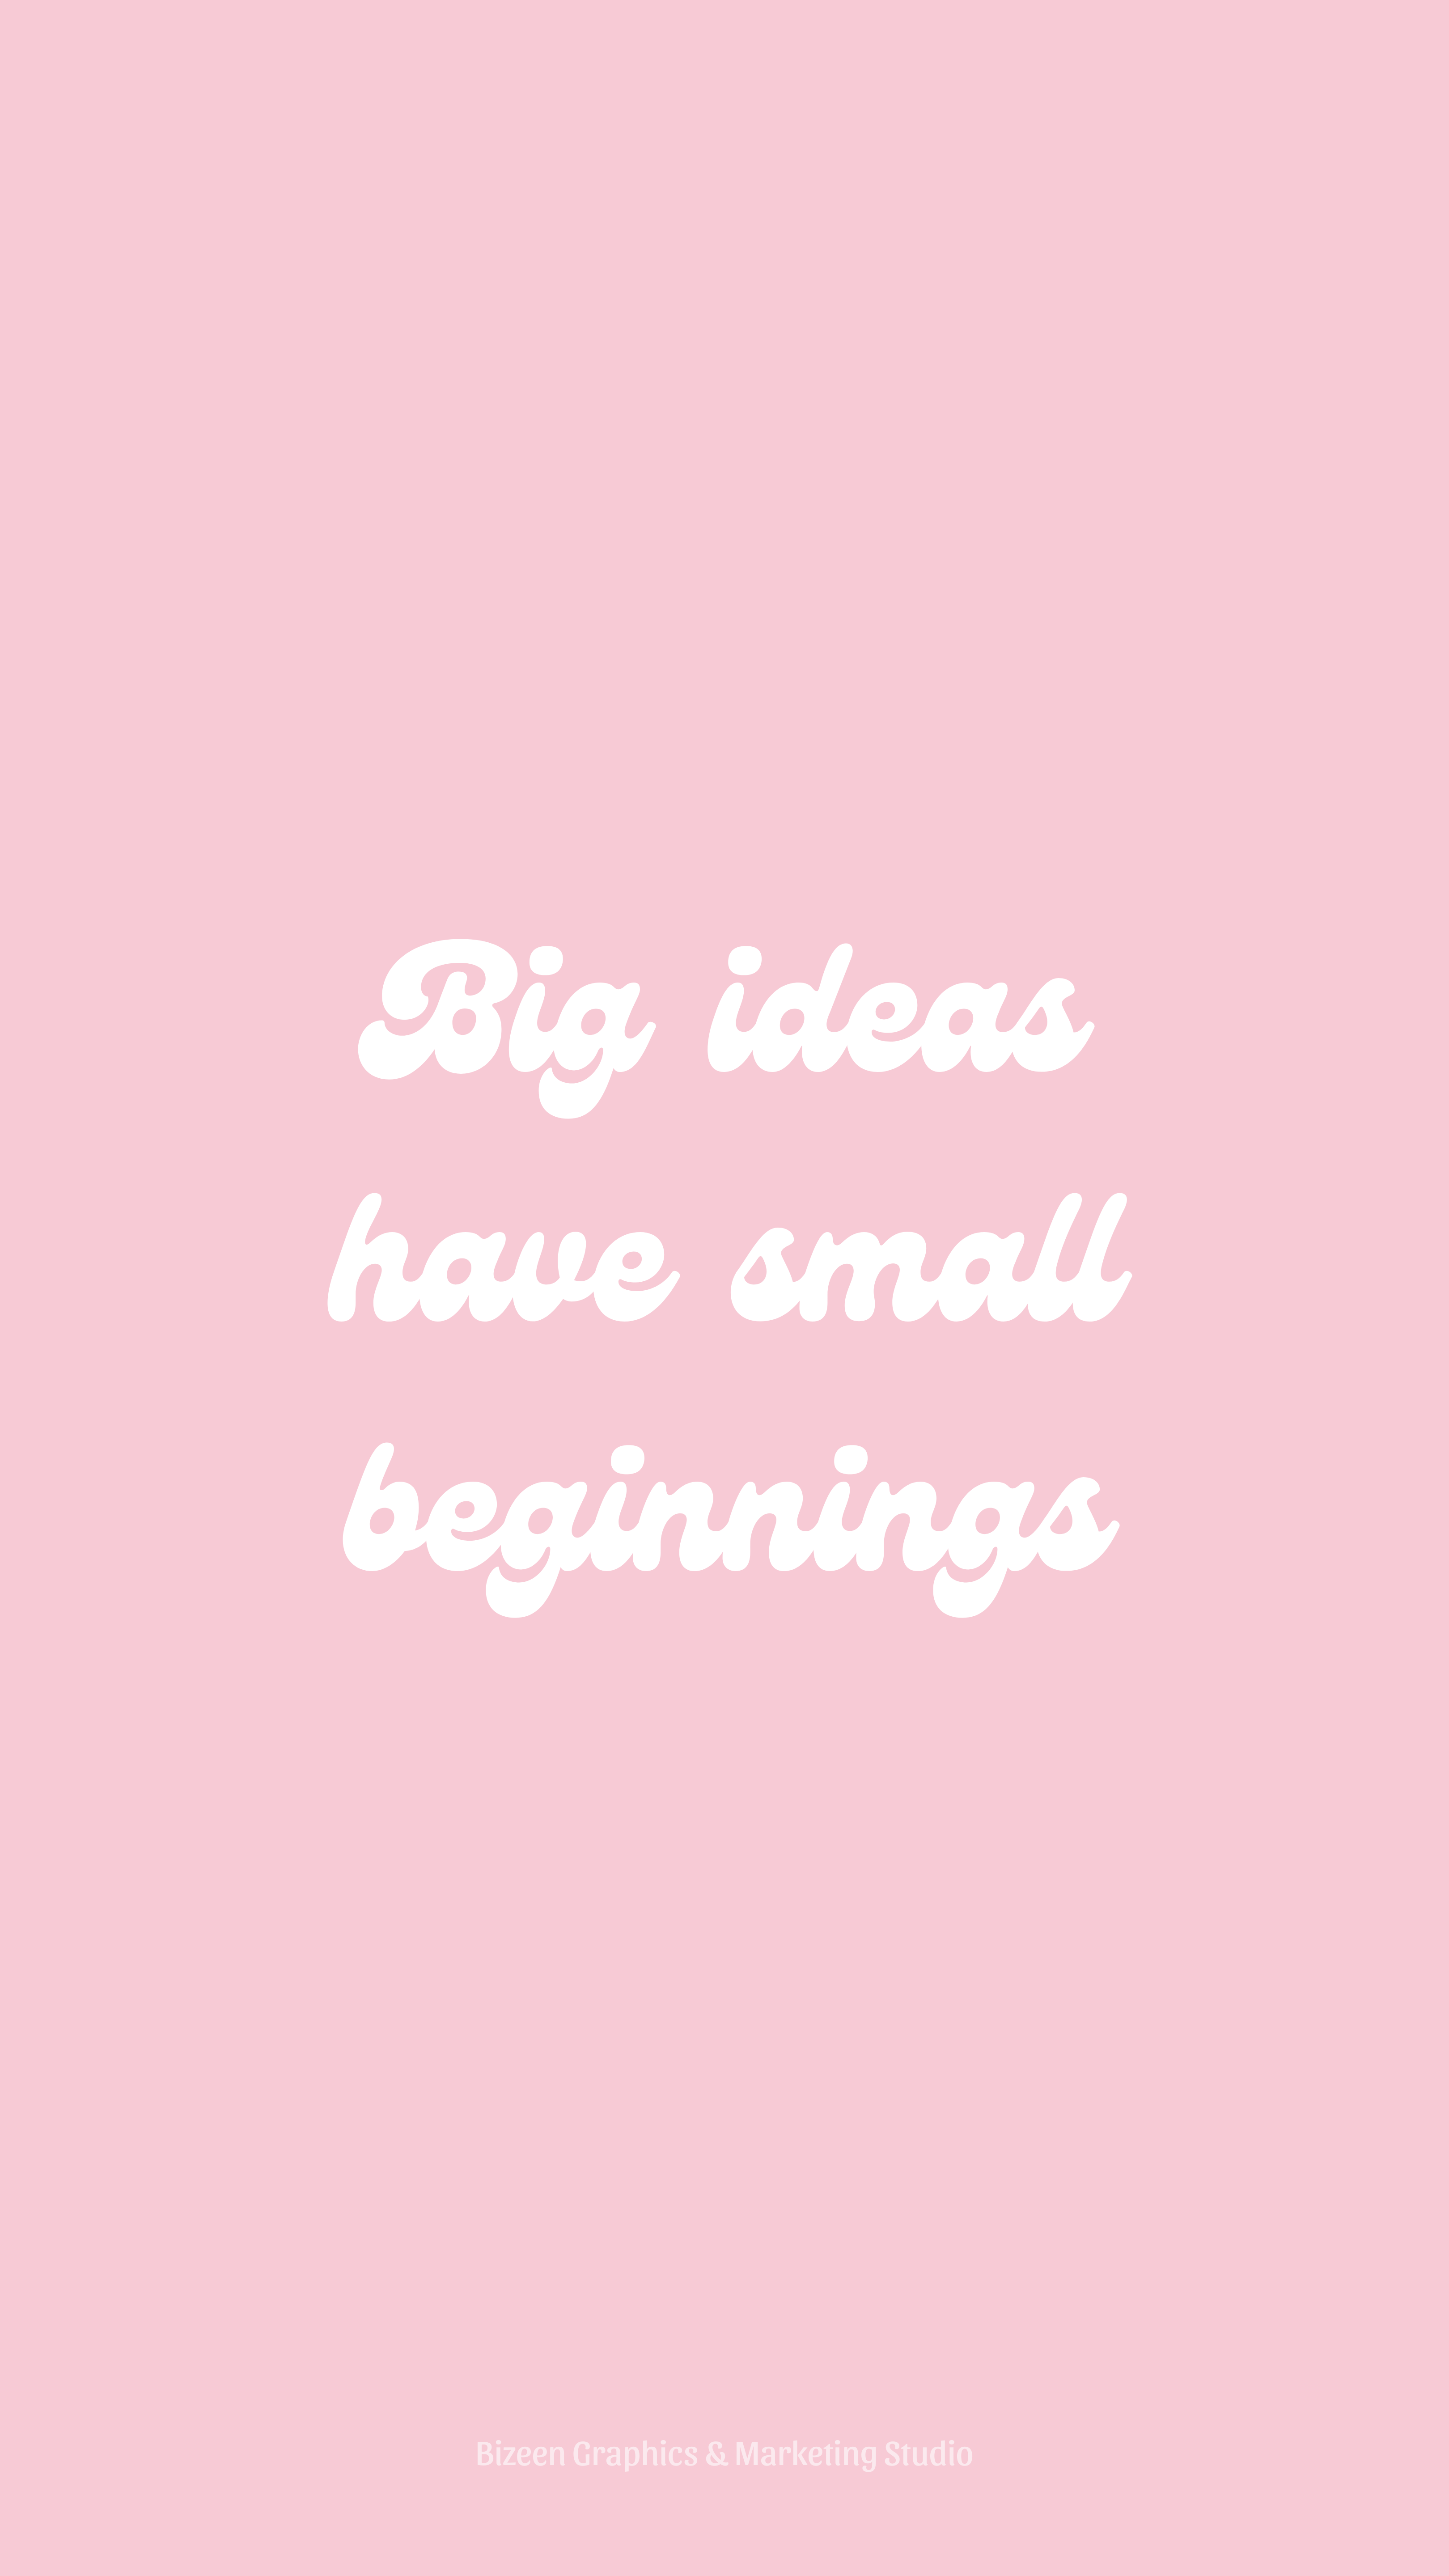 Pastel pink aesthetic wallpaper quotes big ideas have small beginnings pink wallpaper quotes pink quotes pastel pink aesthetic